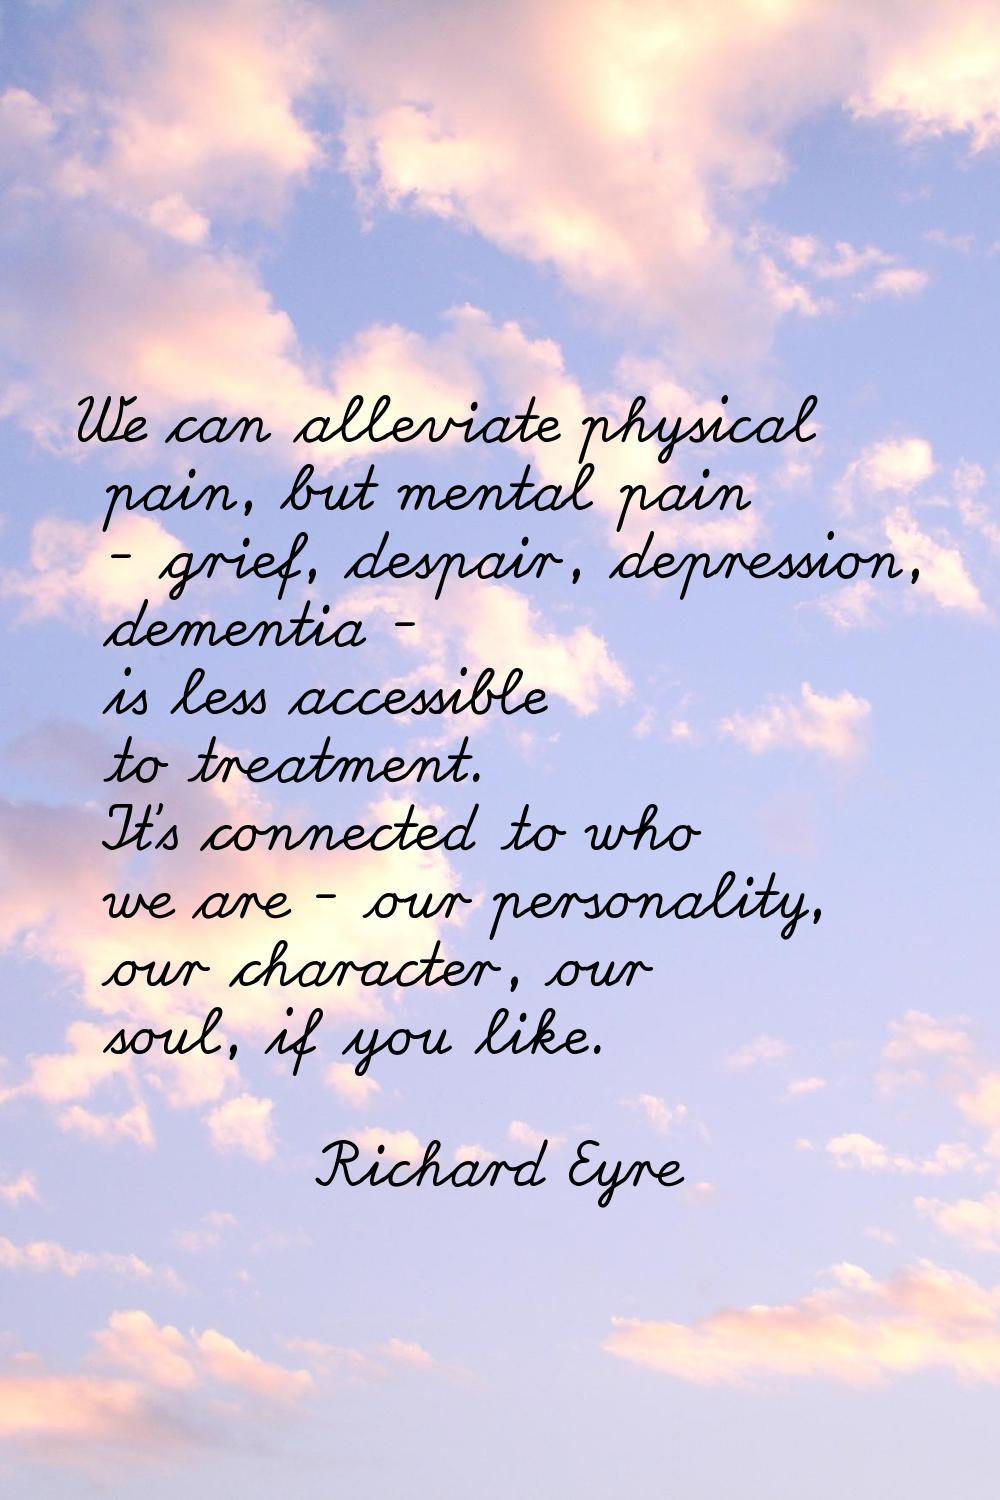 We can alleviate physical pain, but mental pain - grief, despair, depression, dementia - is less ac